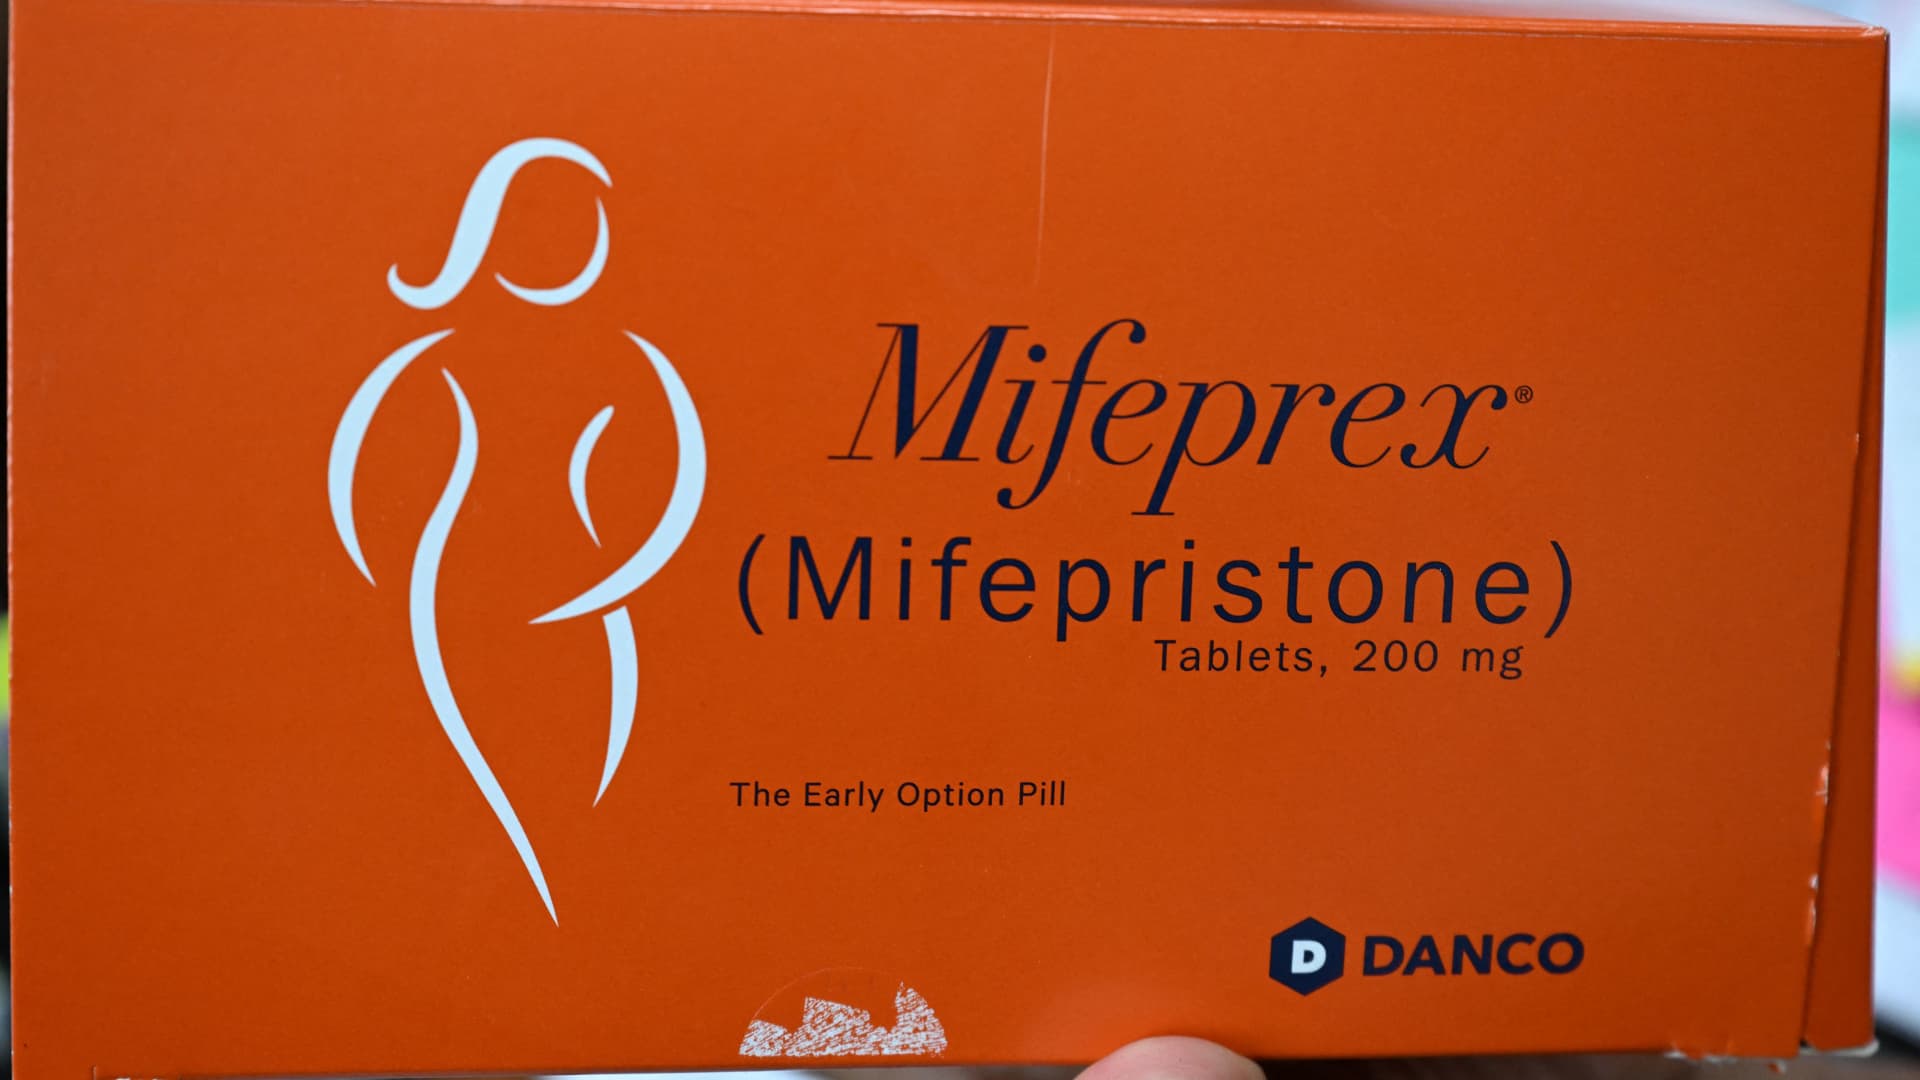 Texas judge could invoke 1873 Comstock Act to roll back mail delivery of abortion pill mifepristone